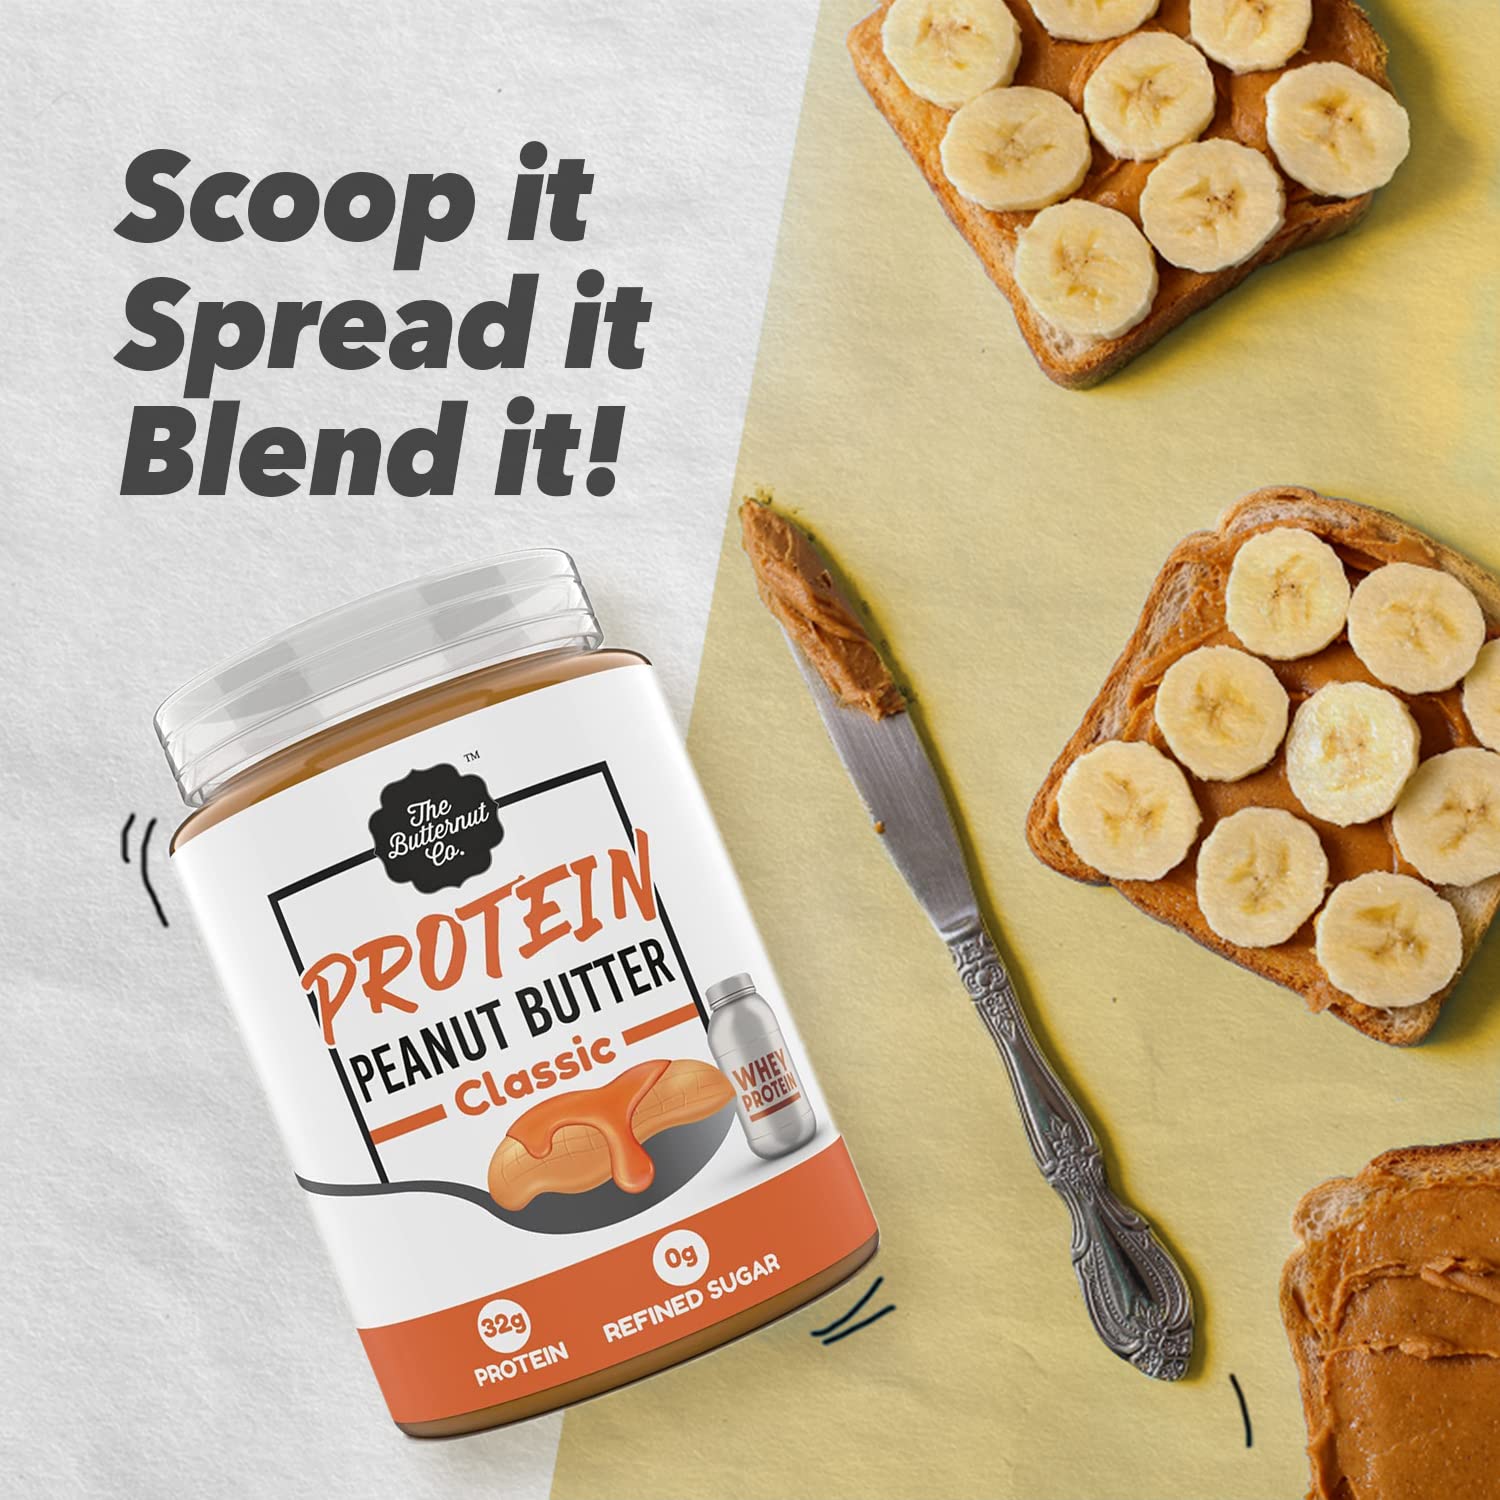 The Butternut Co. Protein Peanut Butter Classic, Creamy 925 Gm (32G Protein, No Refined Sugar, Whey Protein Isolate)